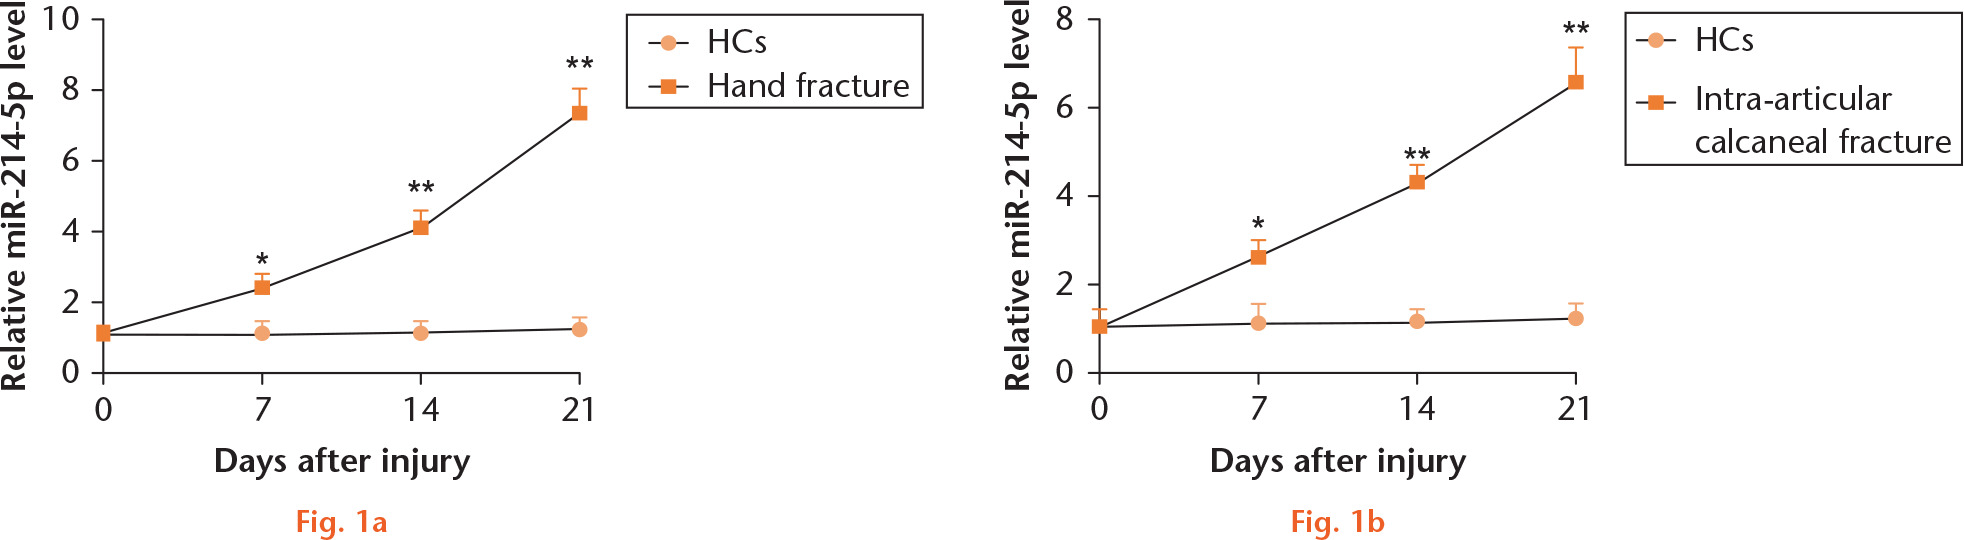  
            Plasma miR-214-5p level is upregulated after fracture. The expressions of miR-214-5p in patients with (a) hand fracture and (b) intra-articular calcaneal fracture at day 7, 14, and 21 post-surgery. *p < 0.05, **p < 0.01 compared with healthy controls (HCs).
          